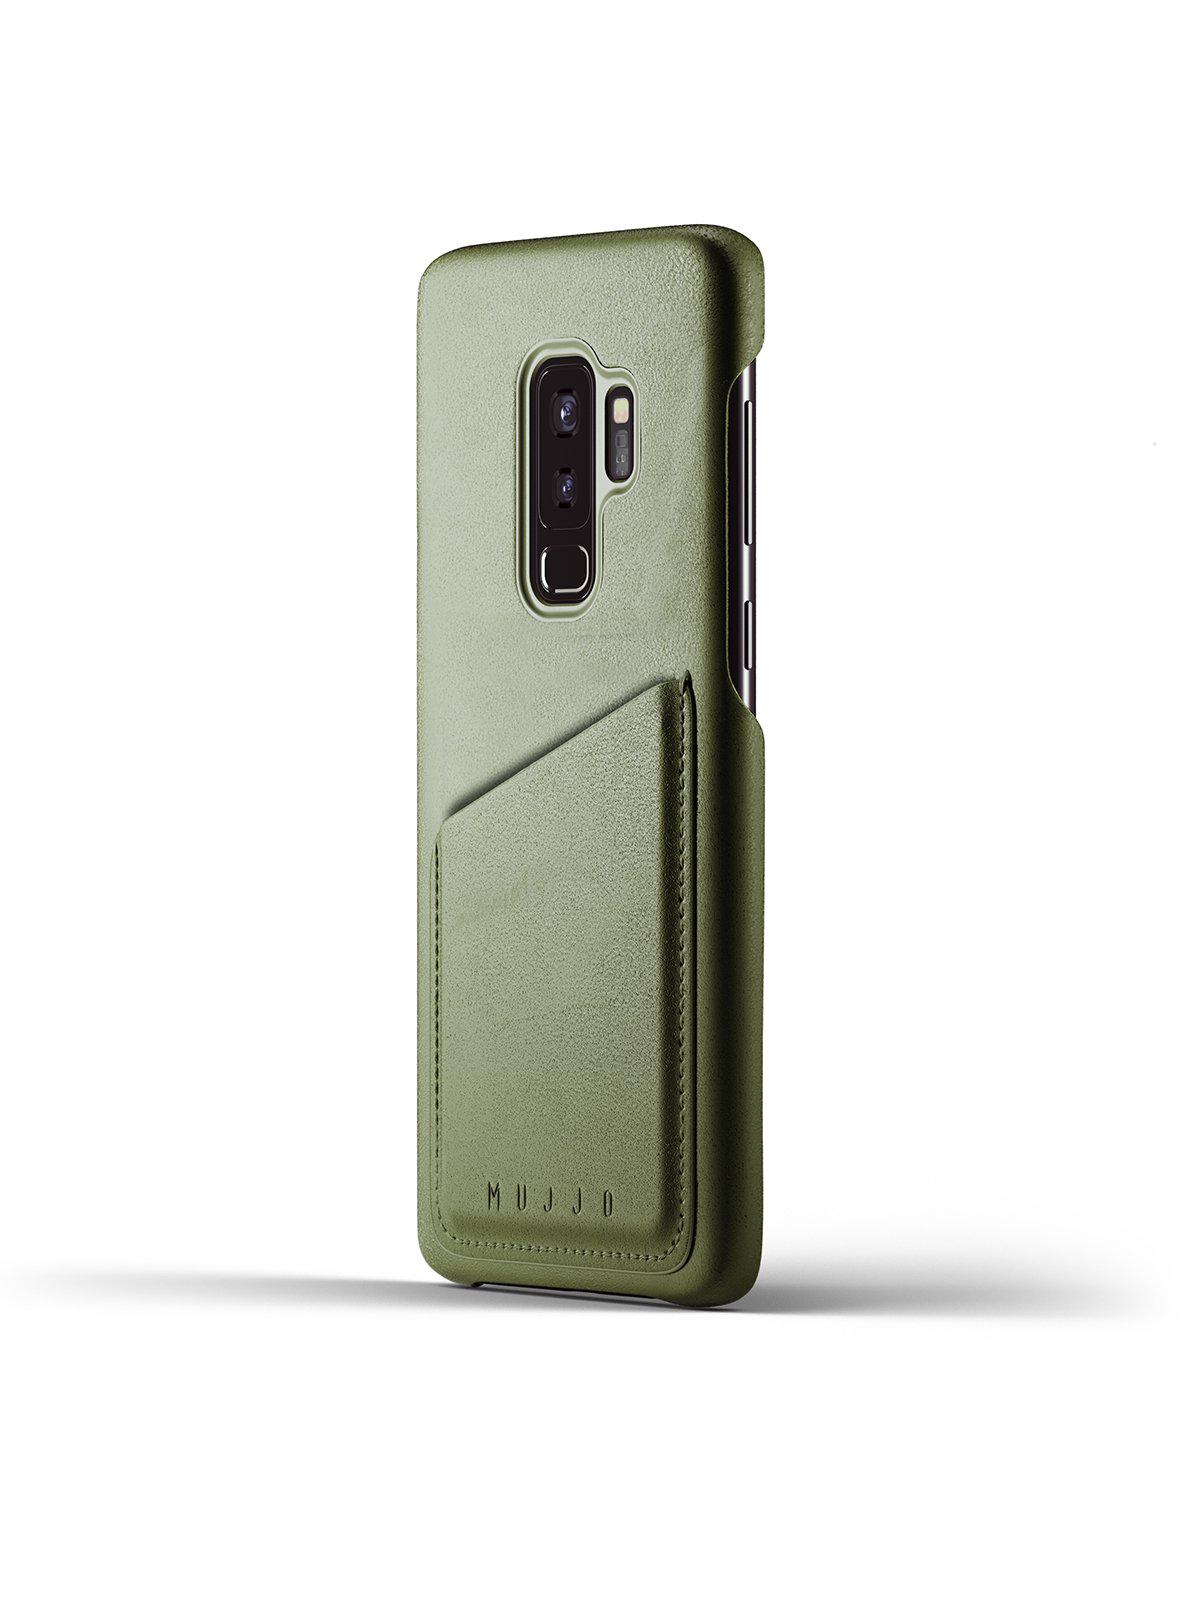 Mujjo Full Leather Wallet Case for Galaxy S9 Plus Olive - MORE by Morello Indonesia